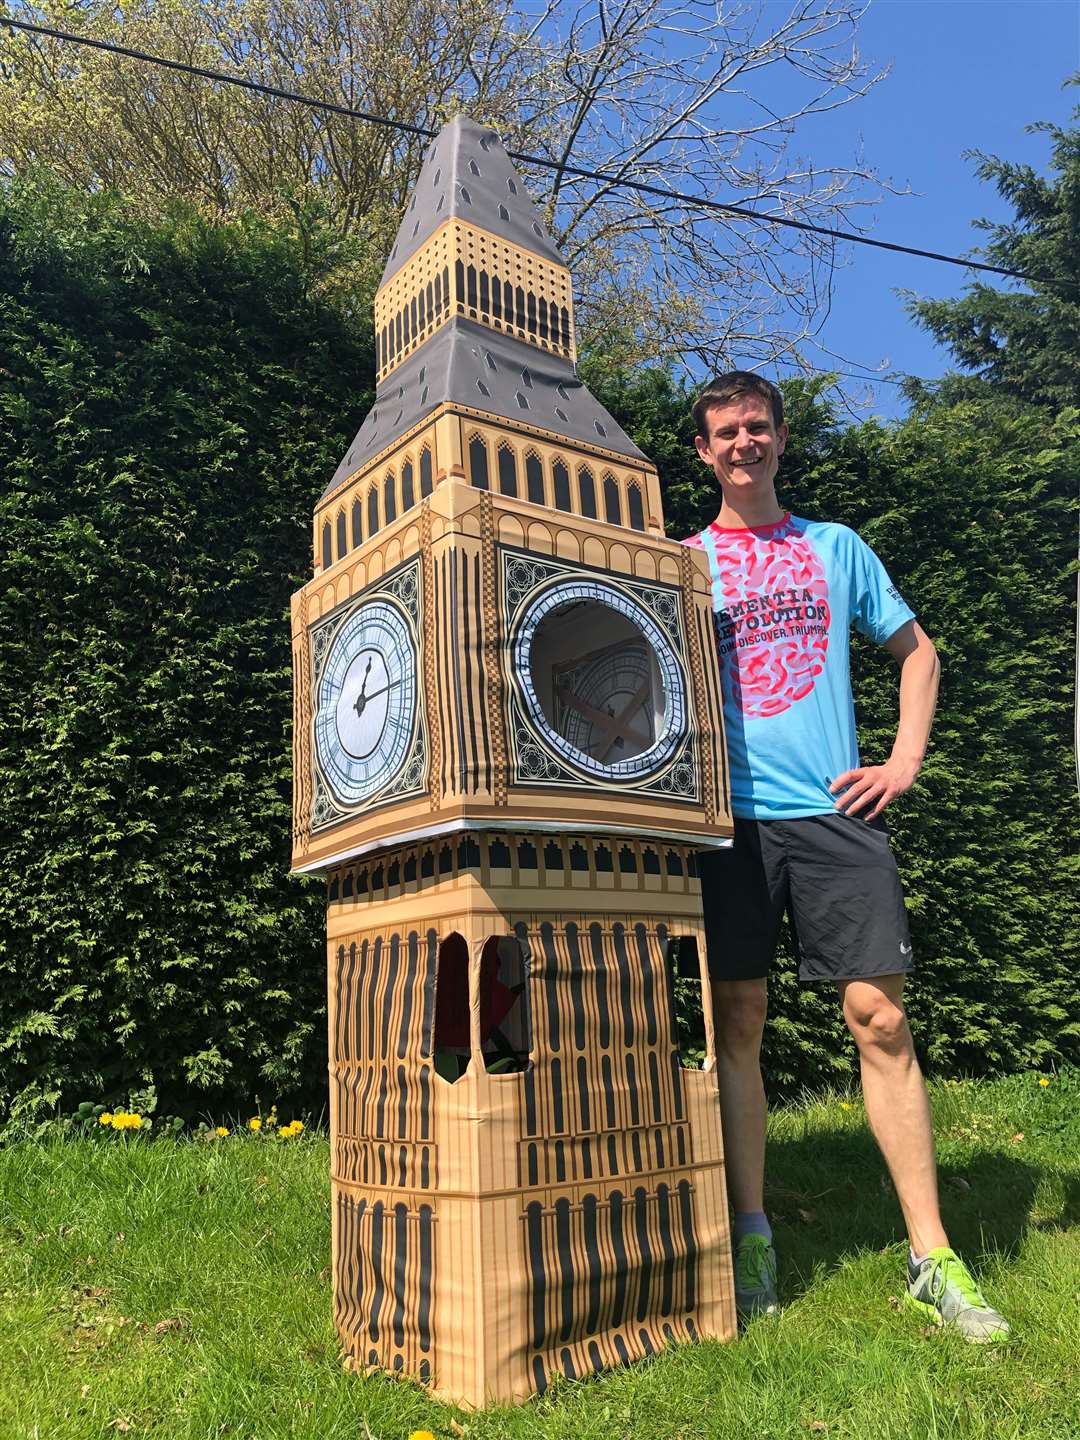 Lukas Bates with the now infamous Big Ben costume. Picture: Alzheimer's Research UK